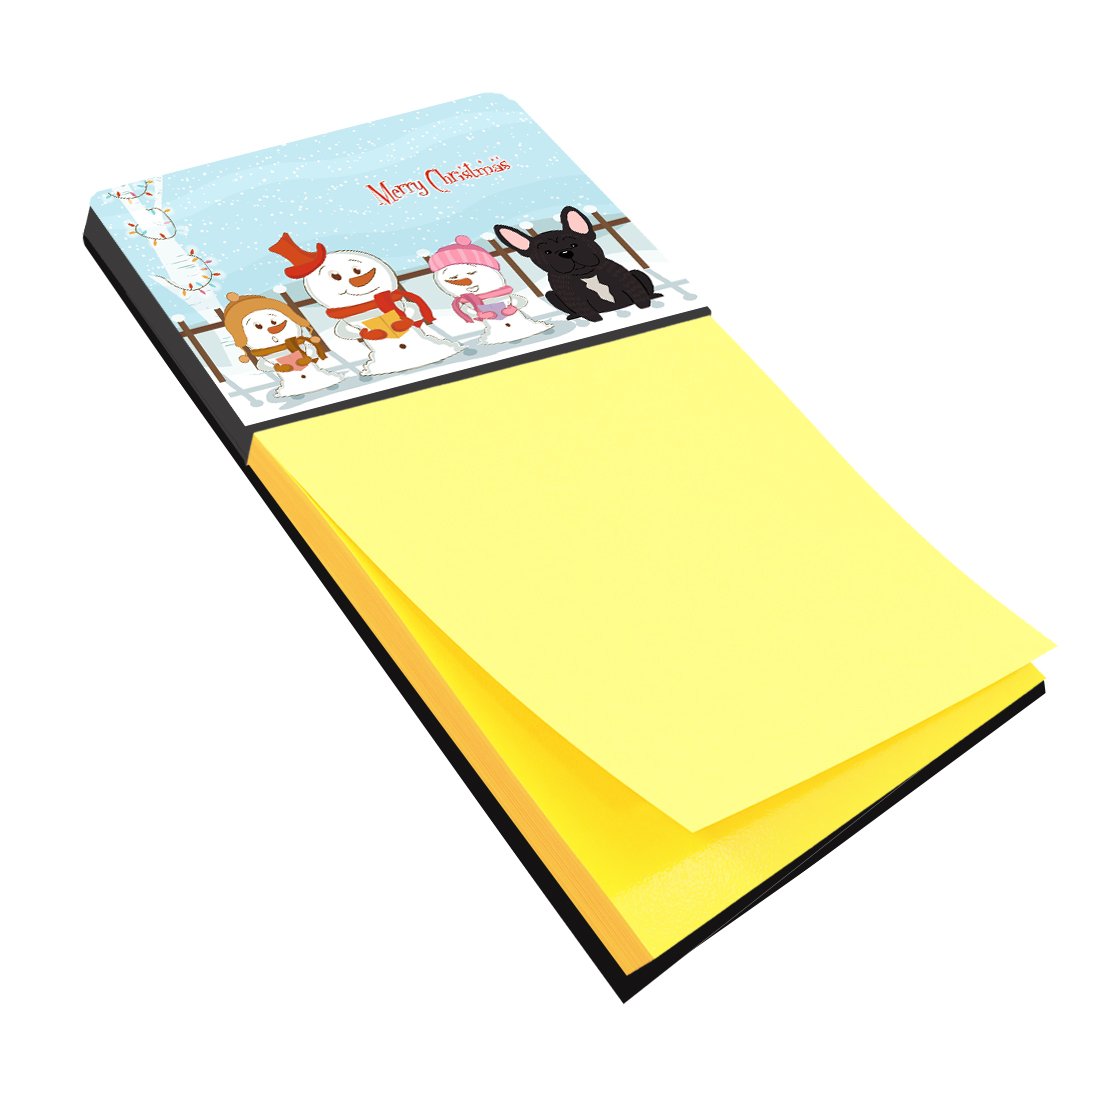 Merry Christmas Carolers French Bulldog Brindle Sticky Note Holder BB2340SN by Caroline's Treasures